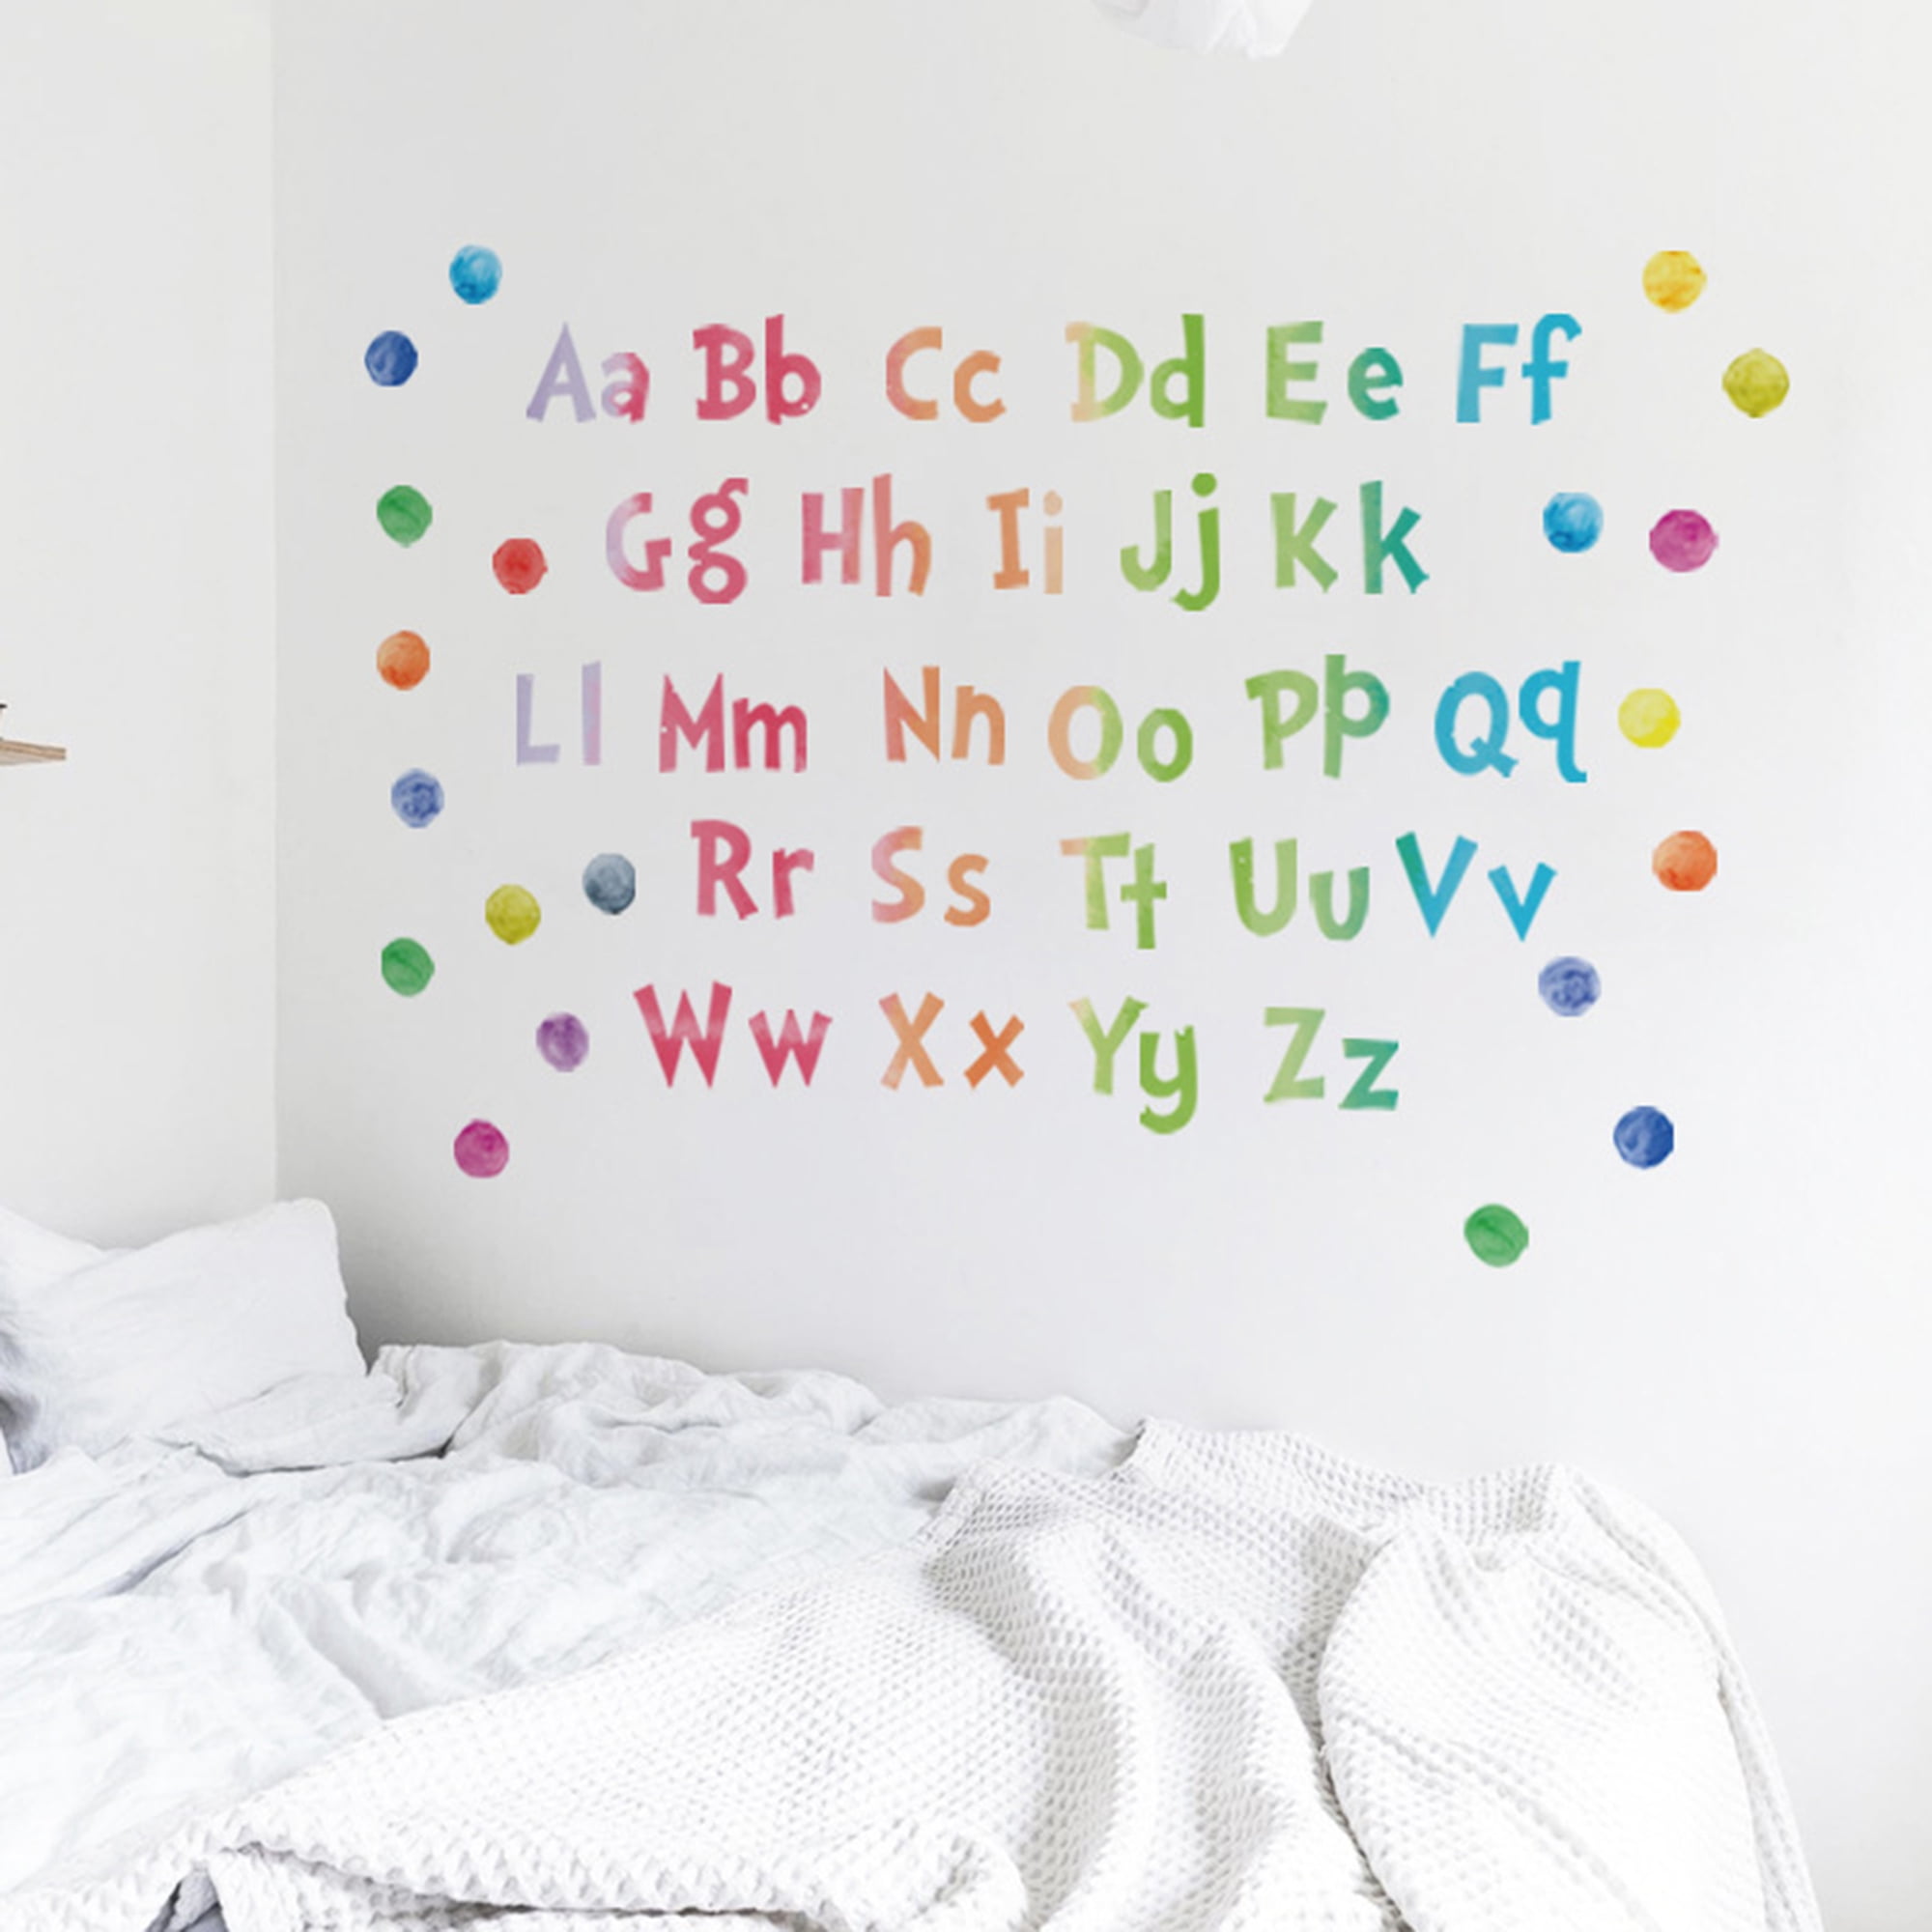 Softball Letters Alphabet Wall Stickers Peel and Stick ABC Children Kids Child Decals Bedroom Nursery Playroom 